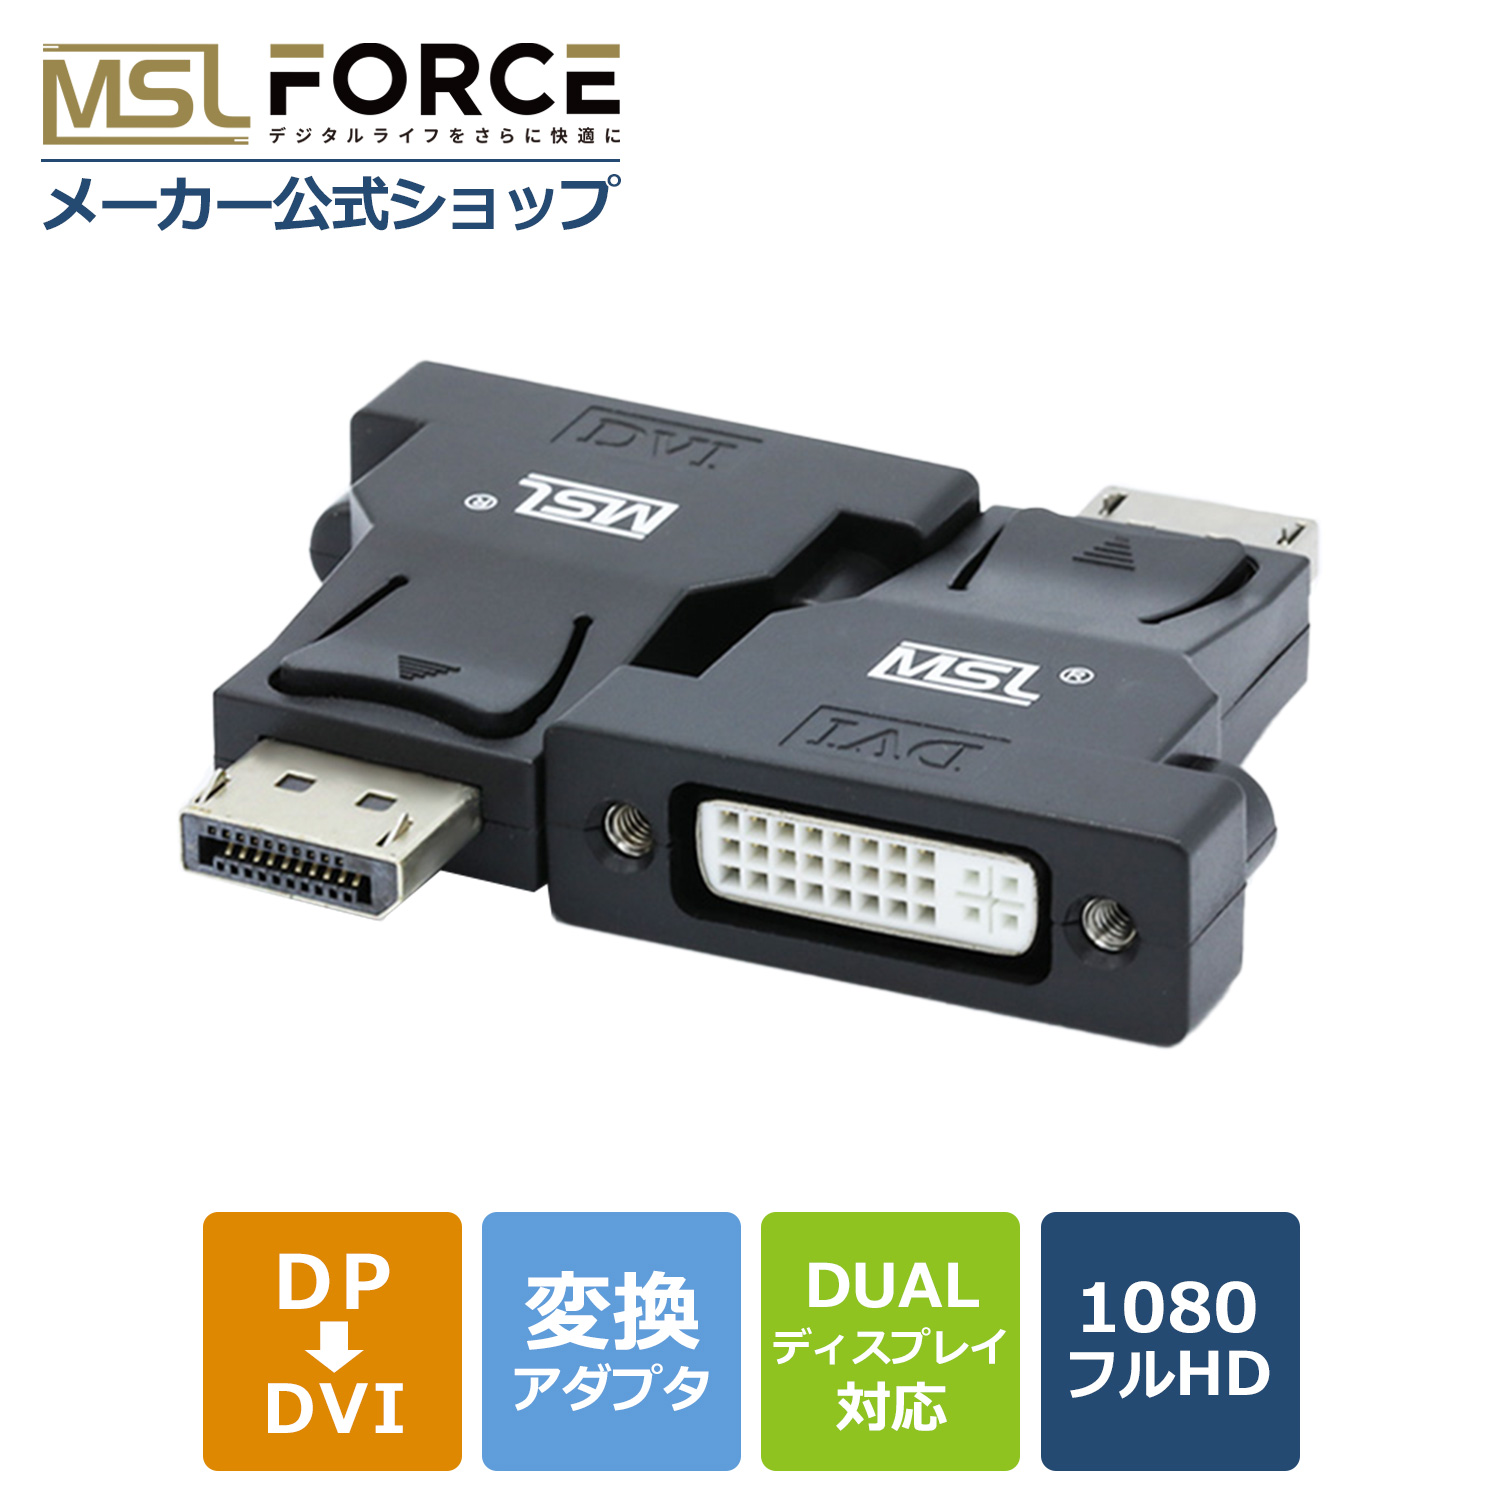 Monster Storage 2TB NVMe SSD PCIe Gen 4×4 最大読込: 7,400MB/s 最大書き：6,700MB/s  PS5確認済み M.2 Type 2280 内蔵 SSD 3D TLC MS950G75PCIe4HS-02TB :  ms950g75pcie4hs-02tb : 優良生活 - 通販 - Yahoo!ショッピング